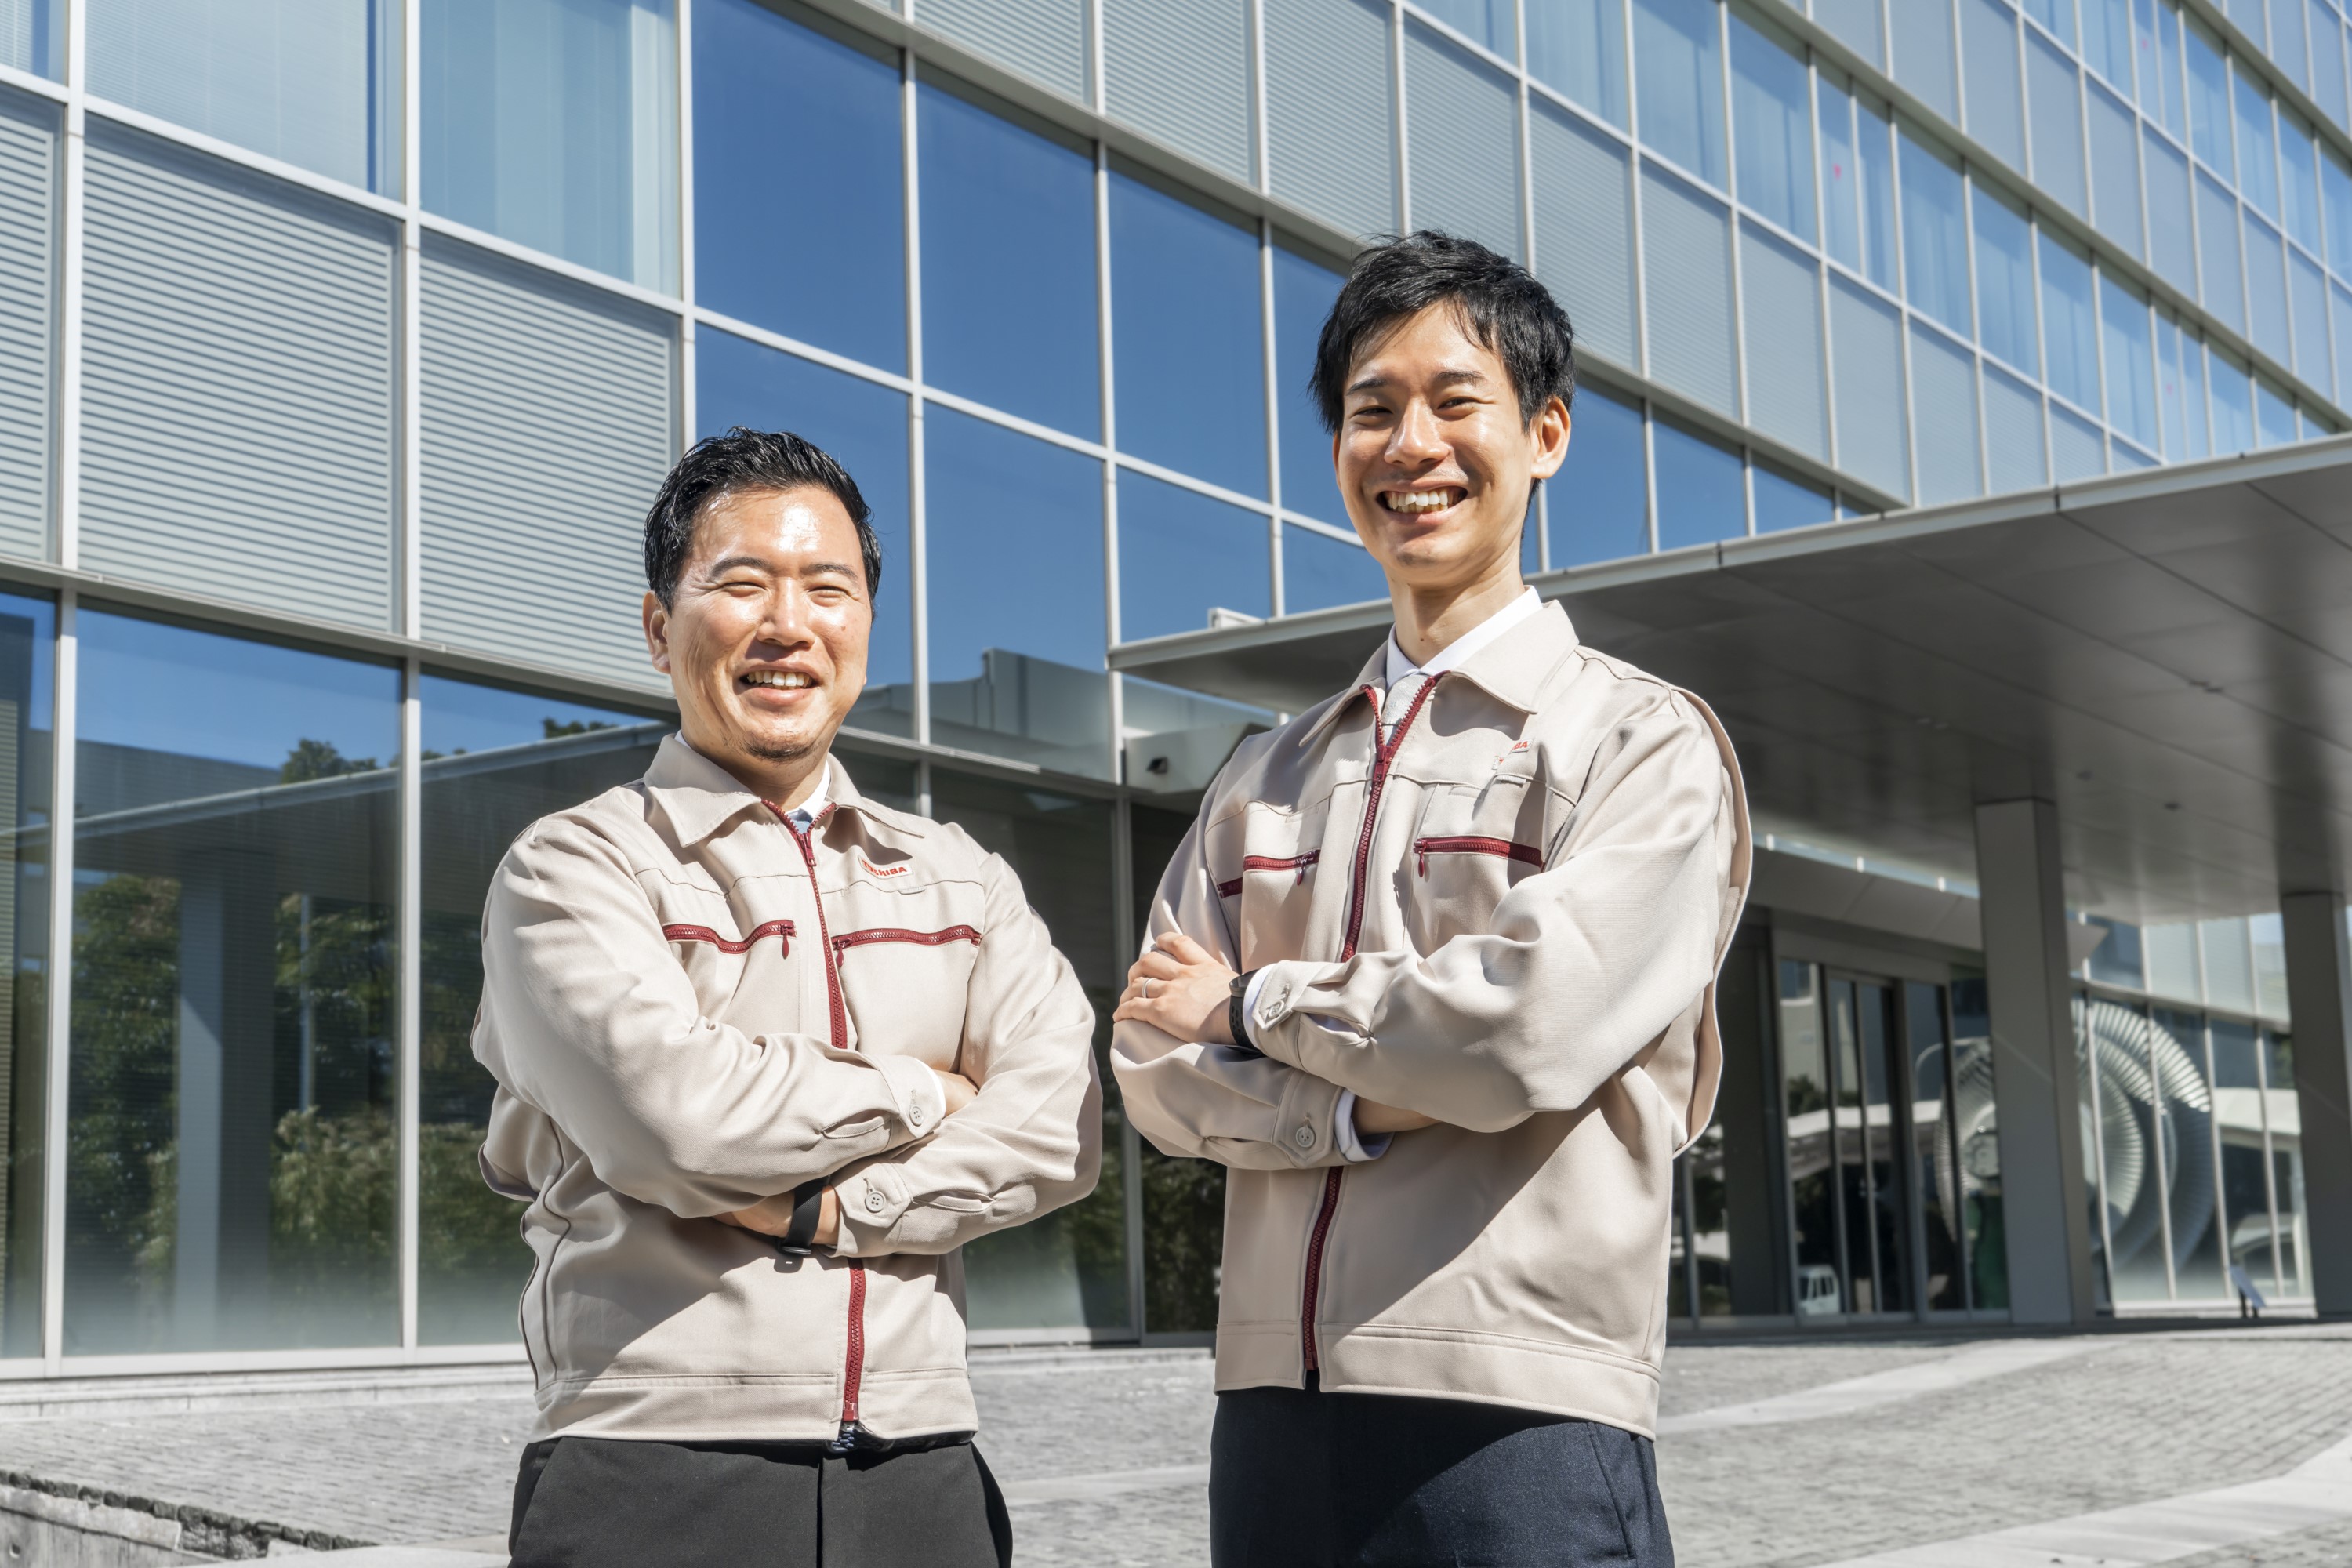 Nakahara (L) and Sugiura (R) standing in front of Isogo Nuclear Engineering Center